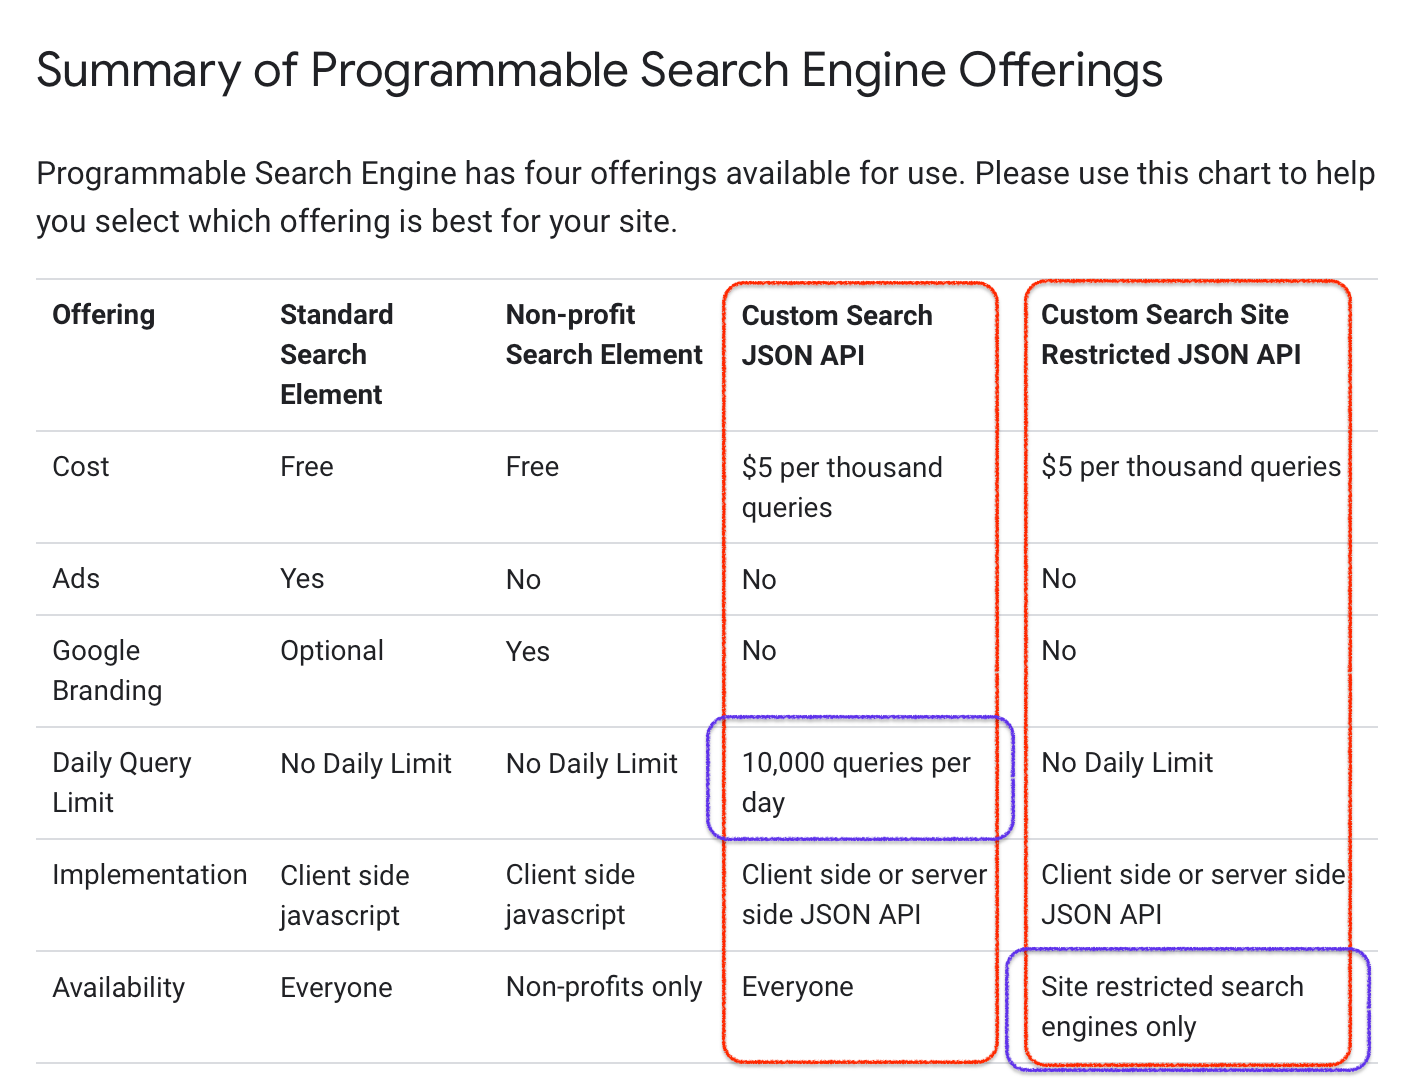 Restrictions of Google Search API